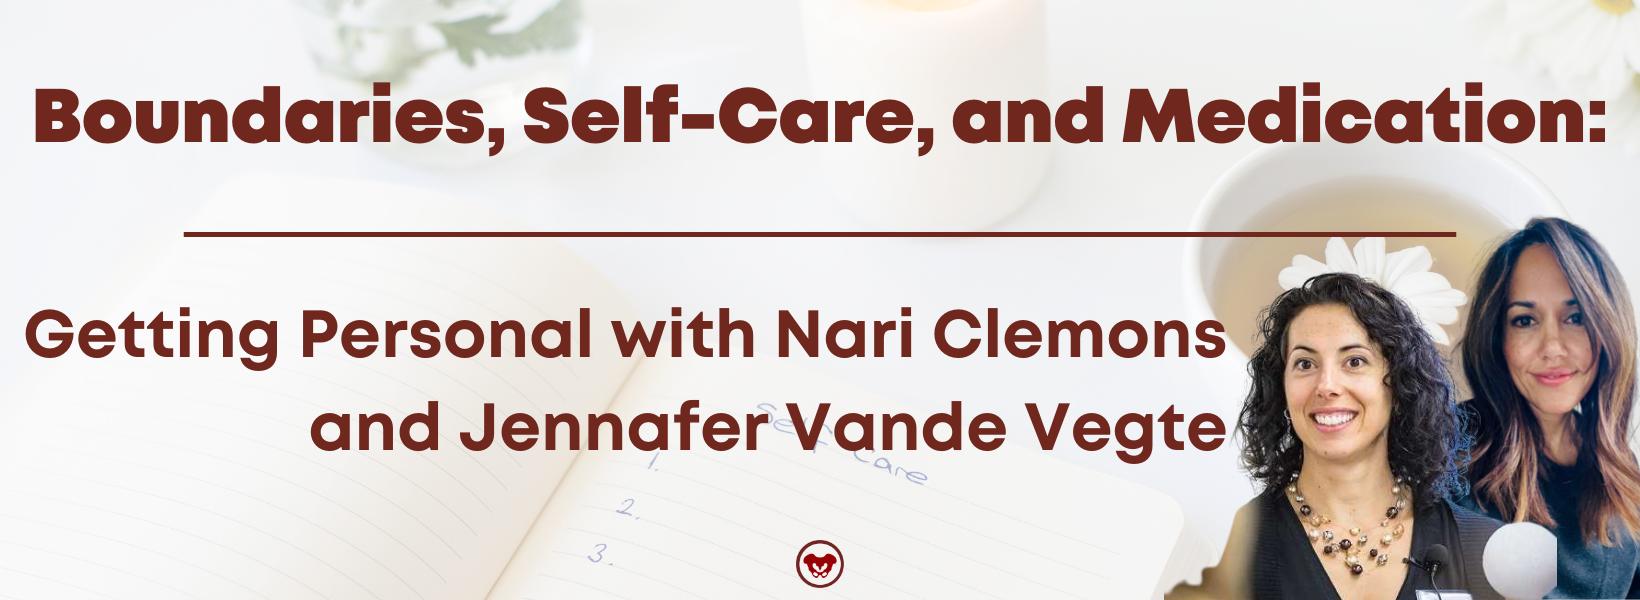 Boundaries, Self-Care, and Meditation: Getting Personal with Nari Clemons and Jennafer Vande Vegte